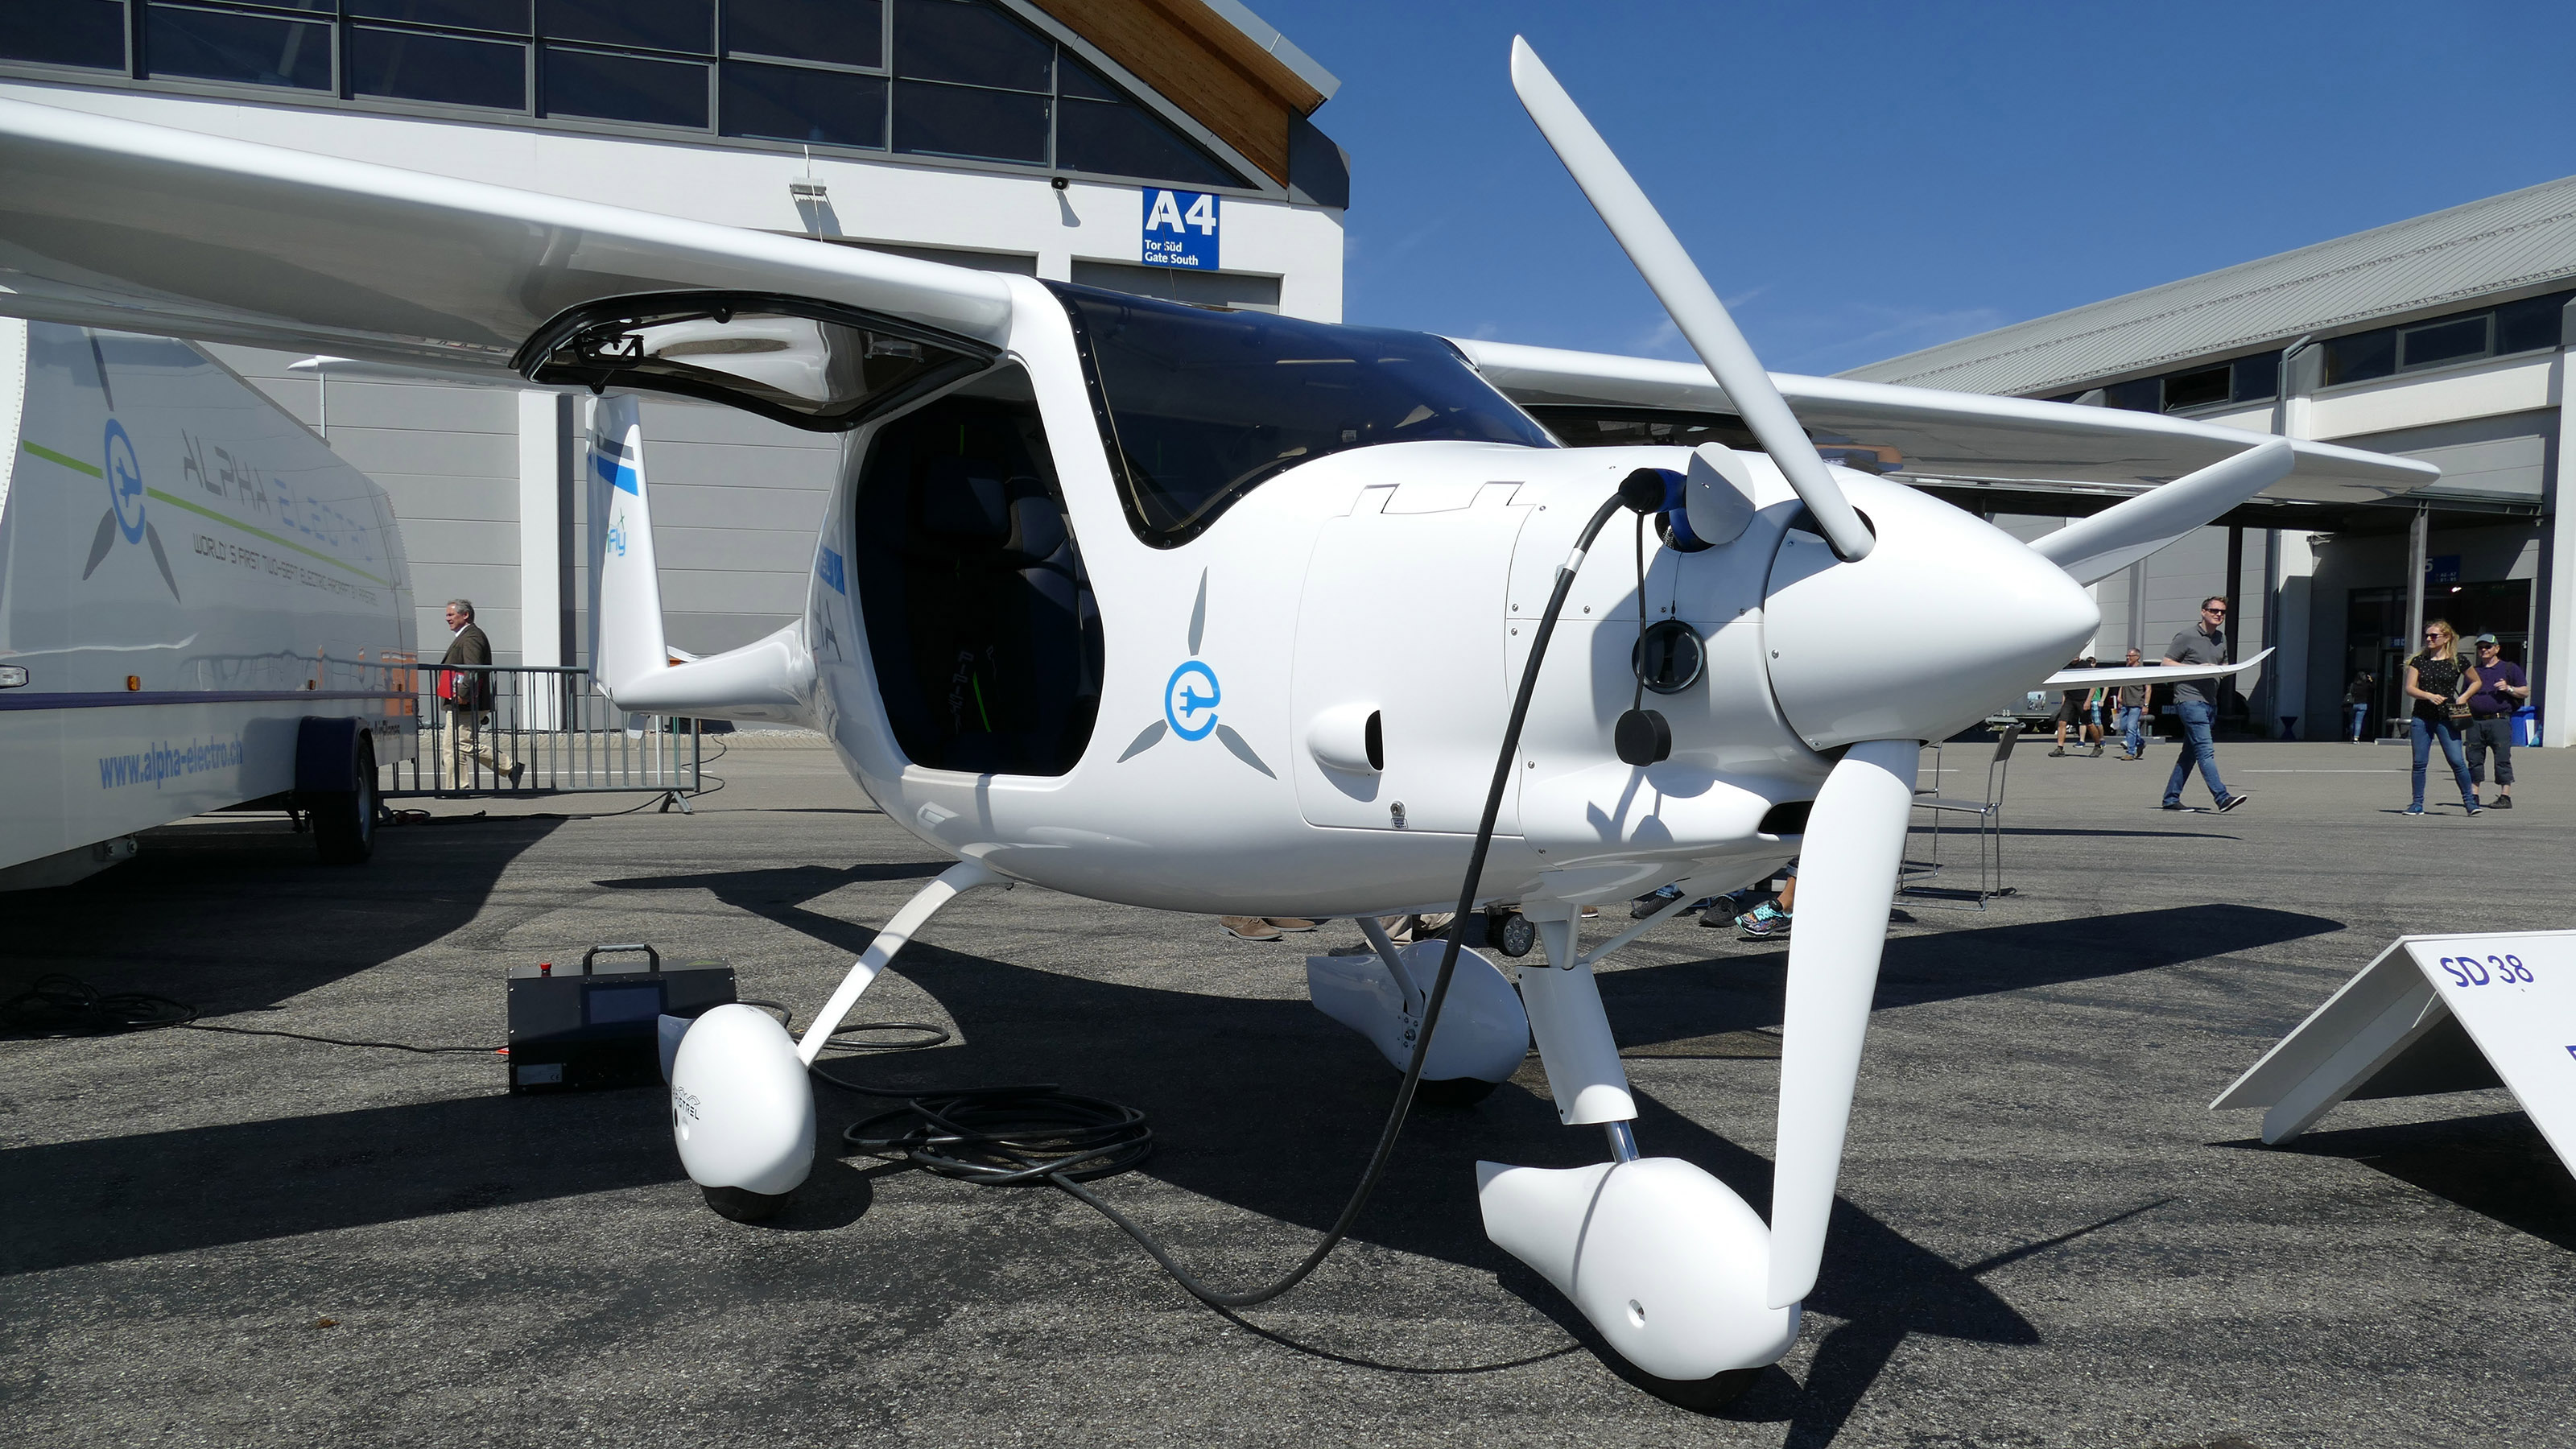 The Pipistrel Alpha Electro two-seat trainer can fly for an hour on a single charge of its lithium-ion battery. Photo by Tom Horne.